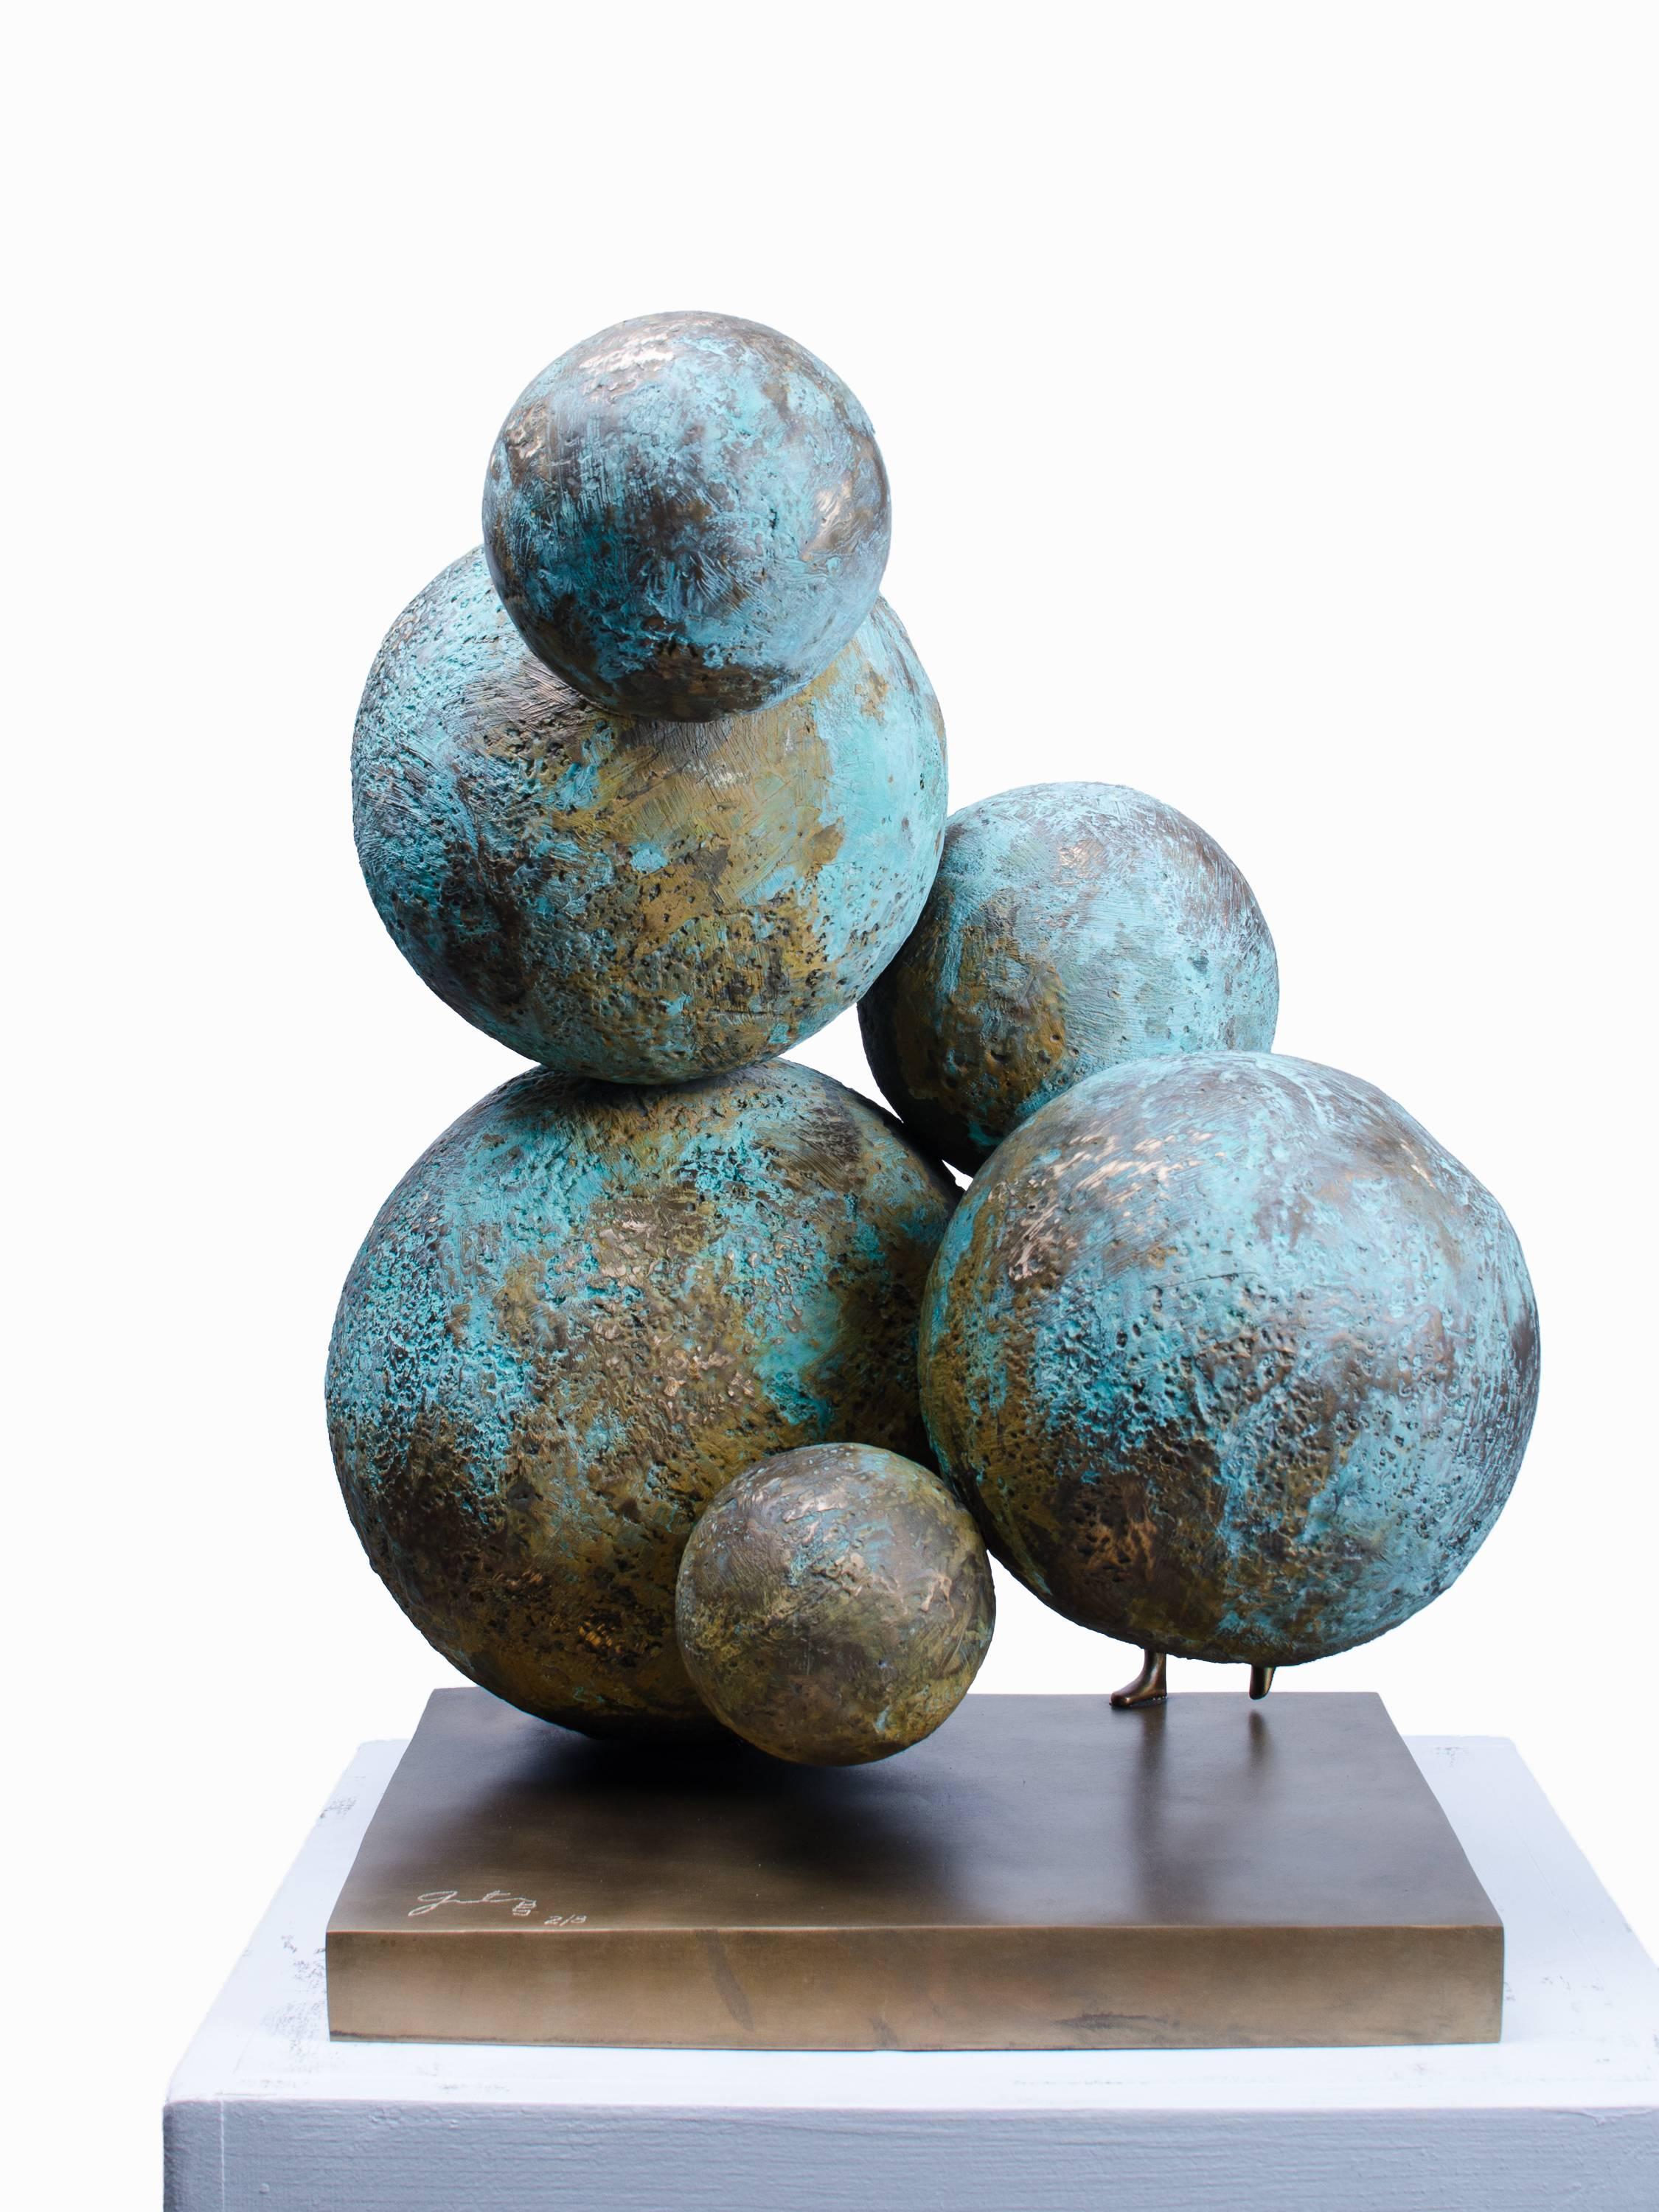 Breaking New Grounds is a contemporary sculpture by Beatriz Gerenstein. It shows a human figurine and some spheres patinated with golden and blue tones like planets are seen from the space.  The figurine is facing, actually walking between the